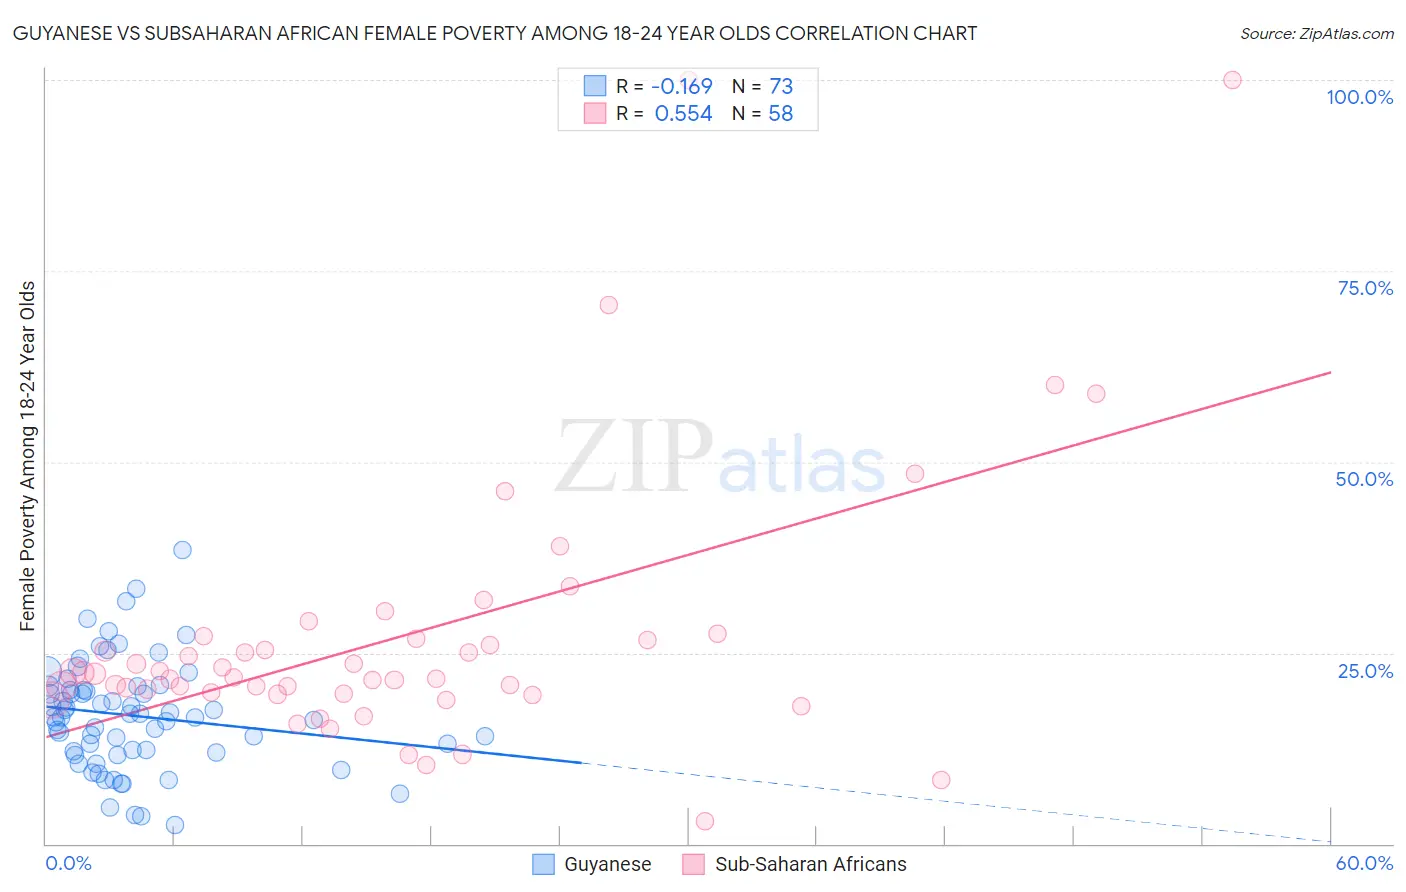 Guyanese vs Subsaharan African Female Poverty Among 18-24 Year Olds